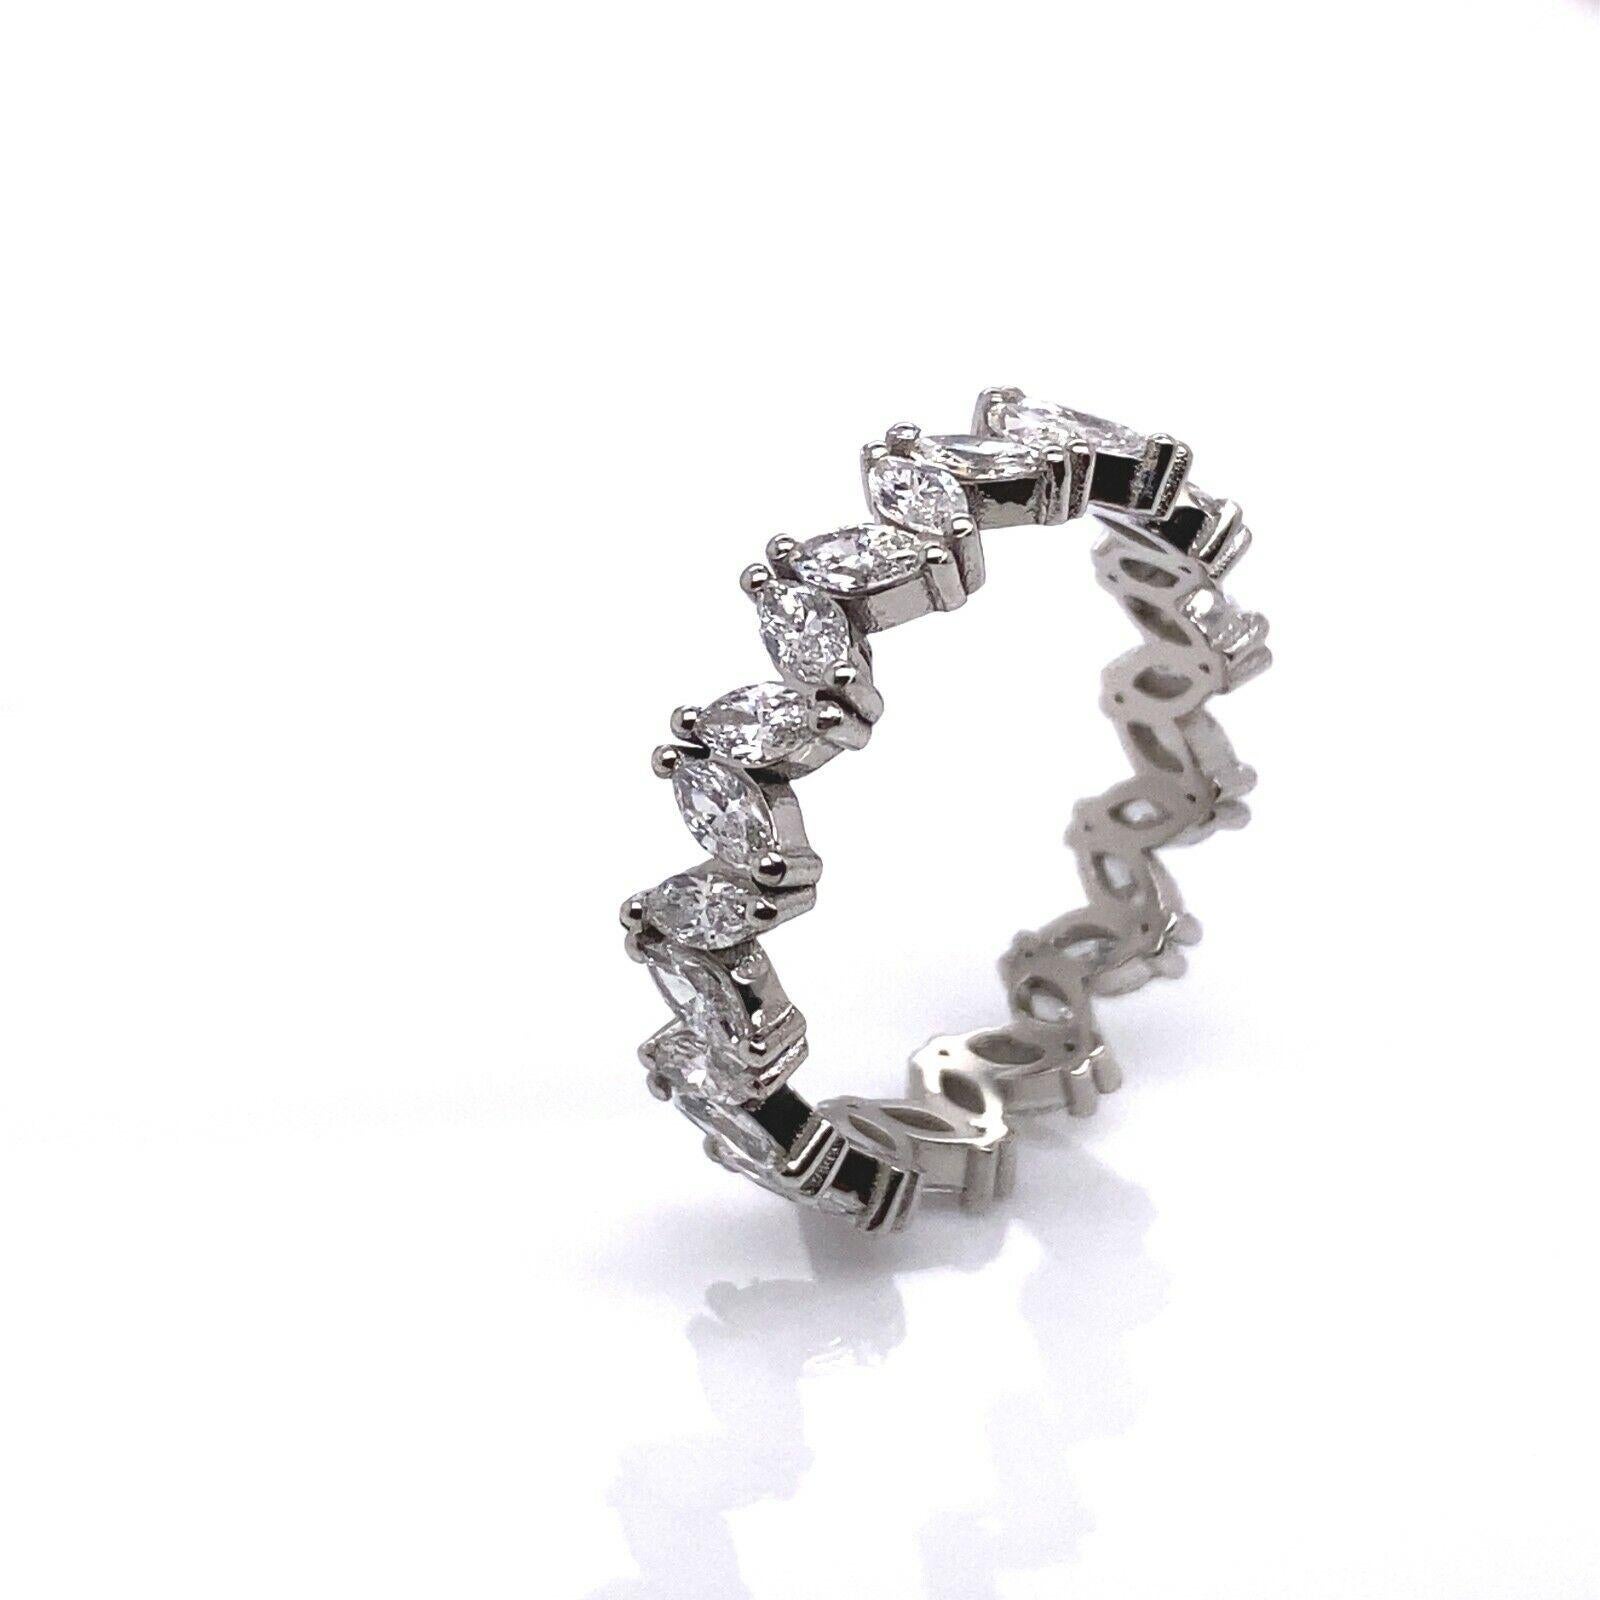 New Marquise Platinum Diamond Full Eternity Ring, Set with 3.60ct of Diamonds.

Additional Information:
Total Diamond Weight: 0.3.60ct
Diamond Colour: F
Diamond Clarity: VS
Width of Band : 4.8mm
Total  Weight: 4.4g
Ring Size: P
SMS5075